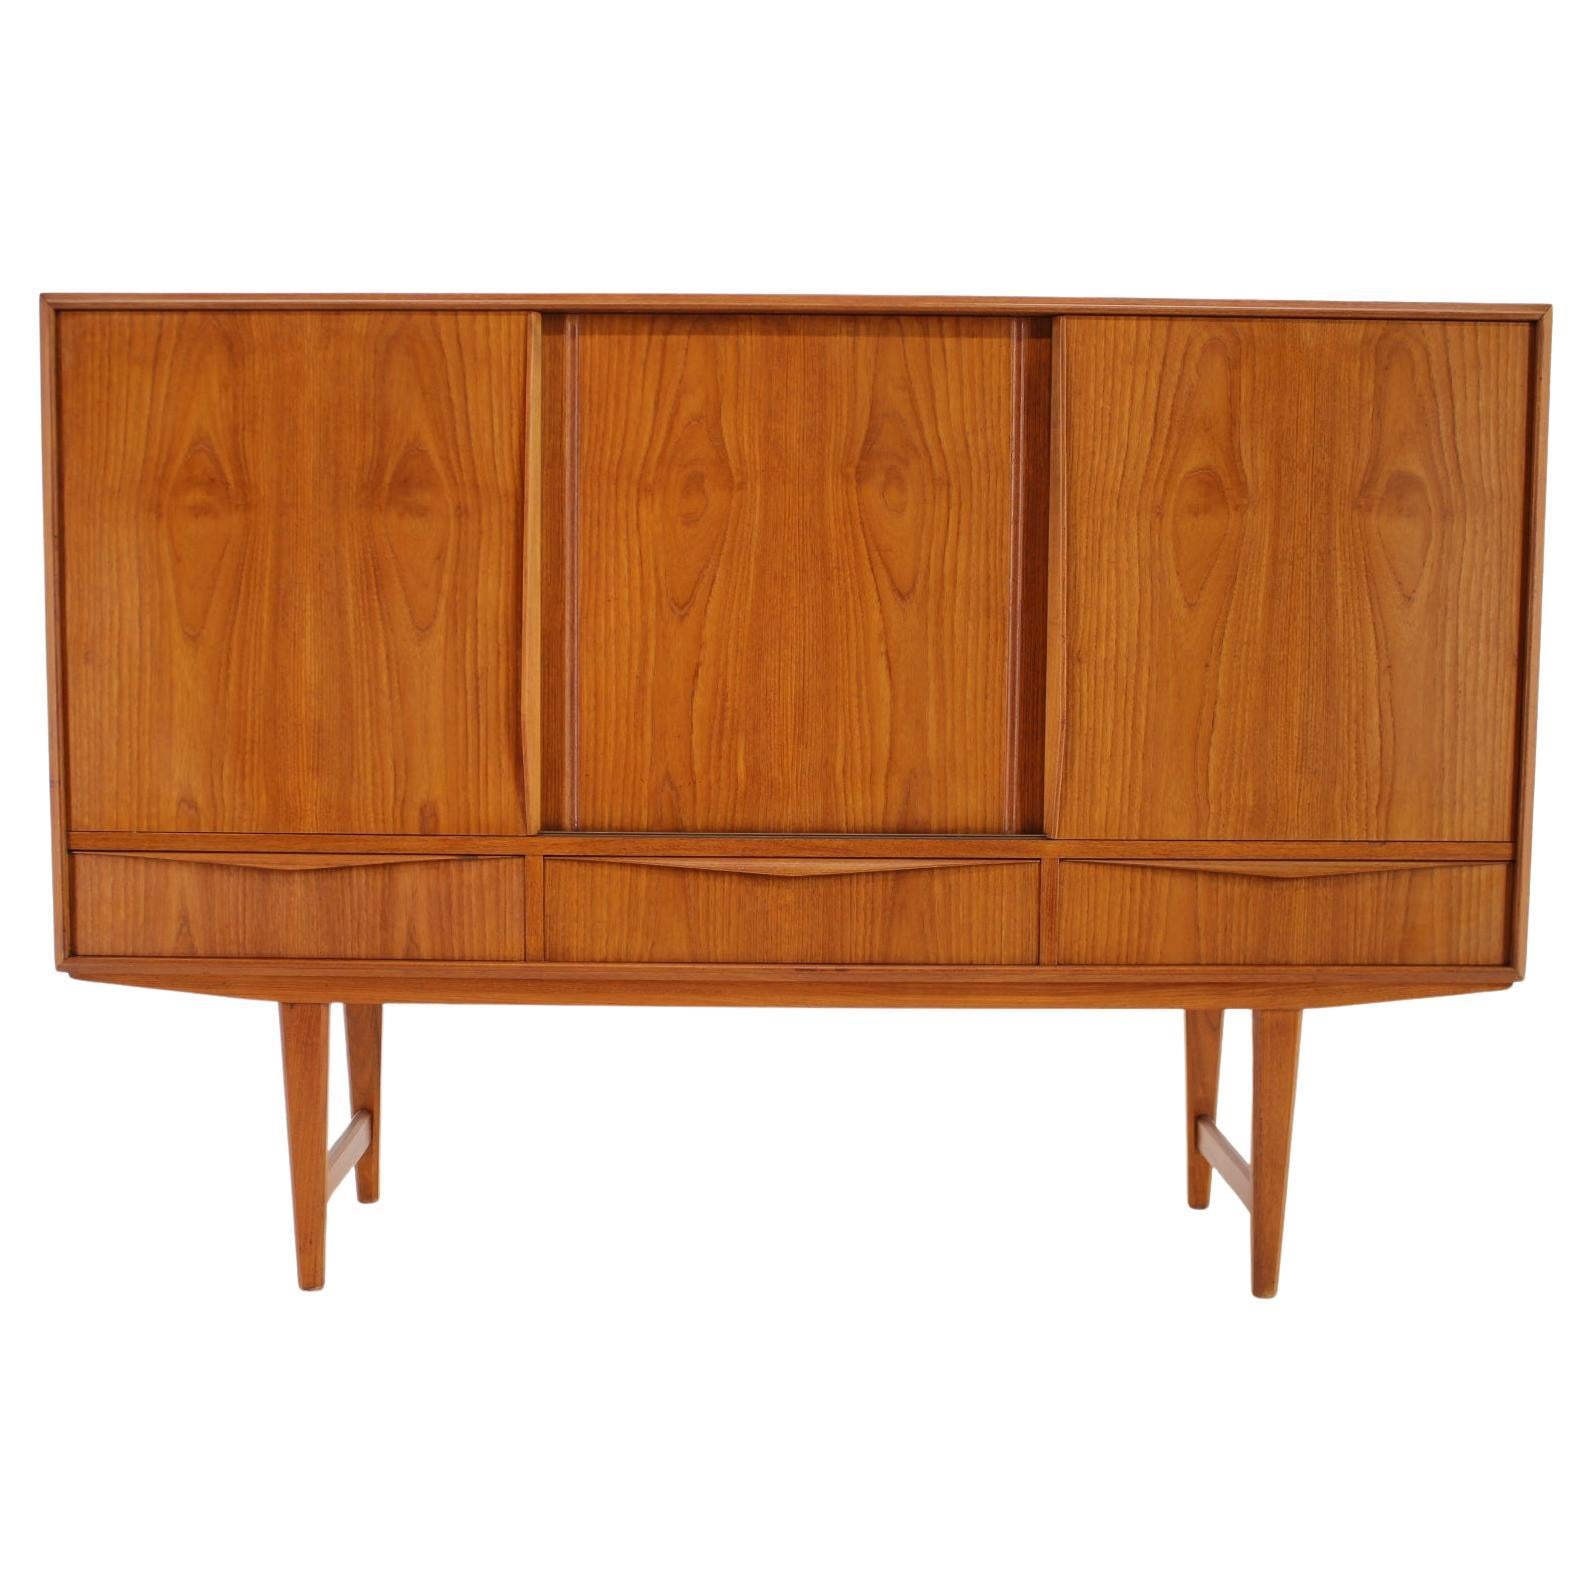 1950s Danish Teak Highboard by E. W. Bach for Sejling Skabe